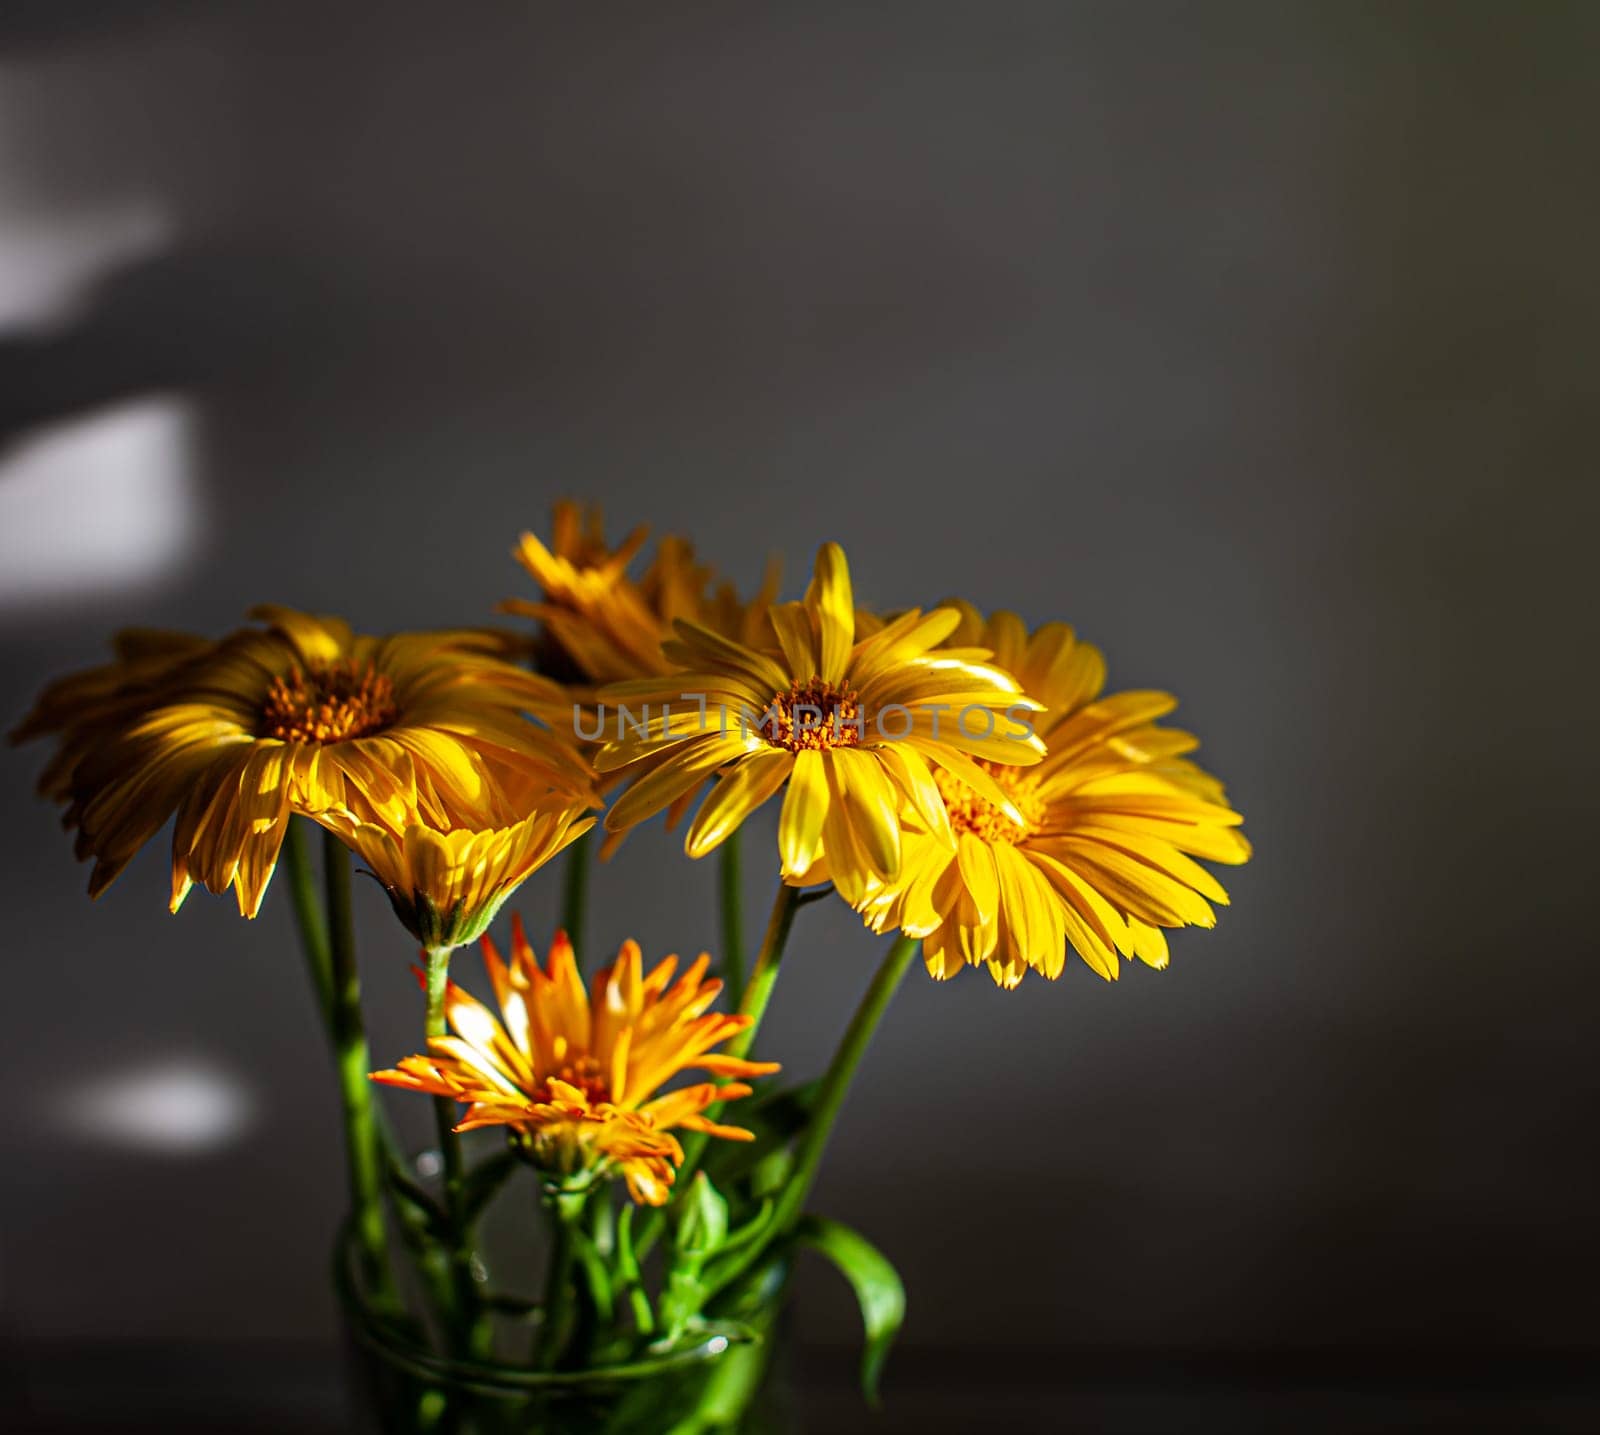 Composition of bright yellow chrysanthemum flowers in a glass beaker on a dark background. Close-up.